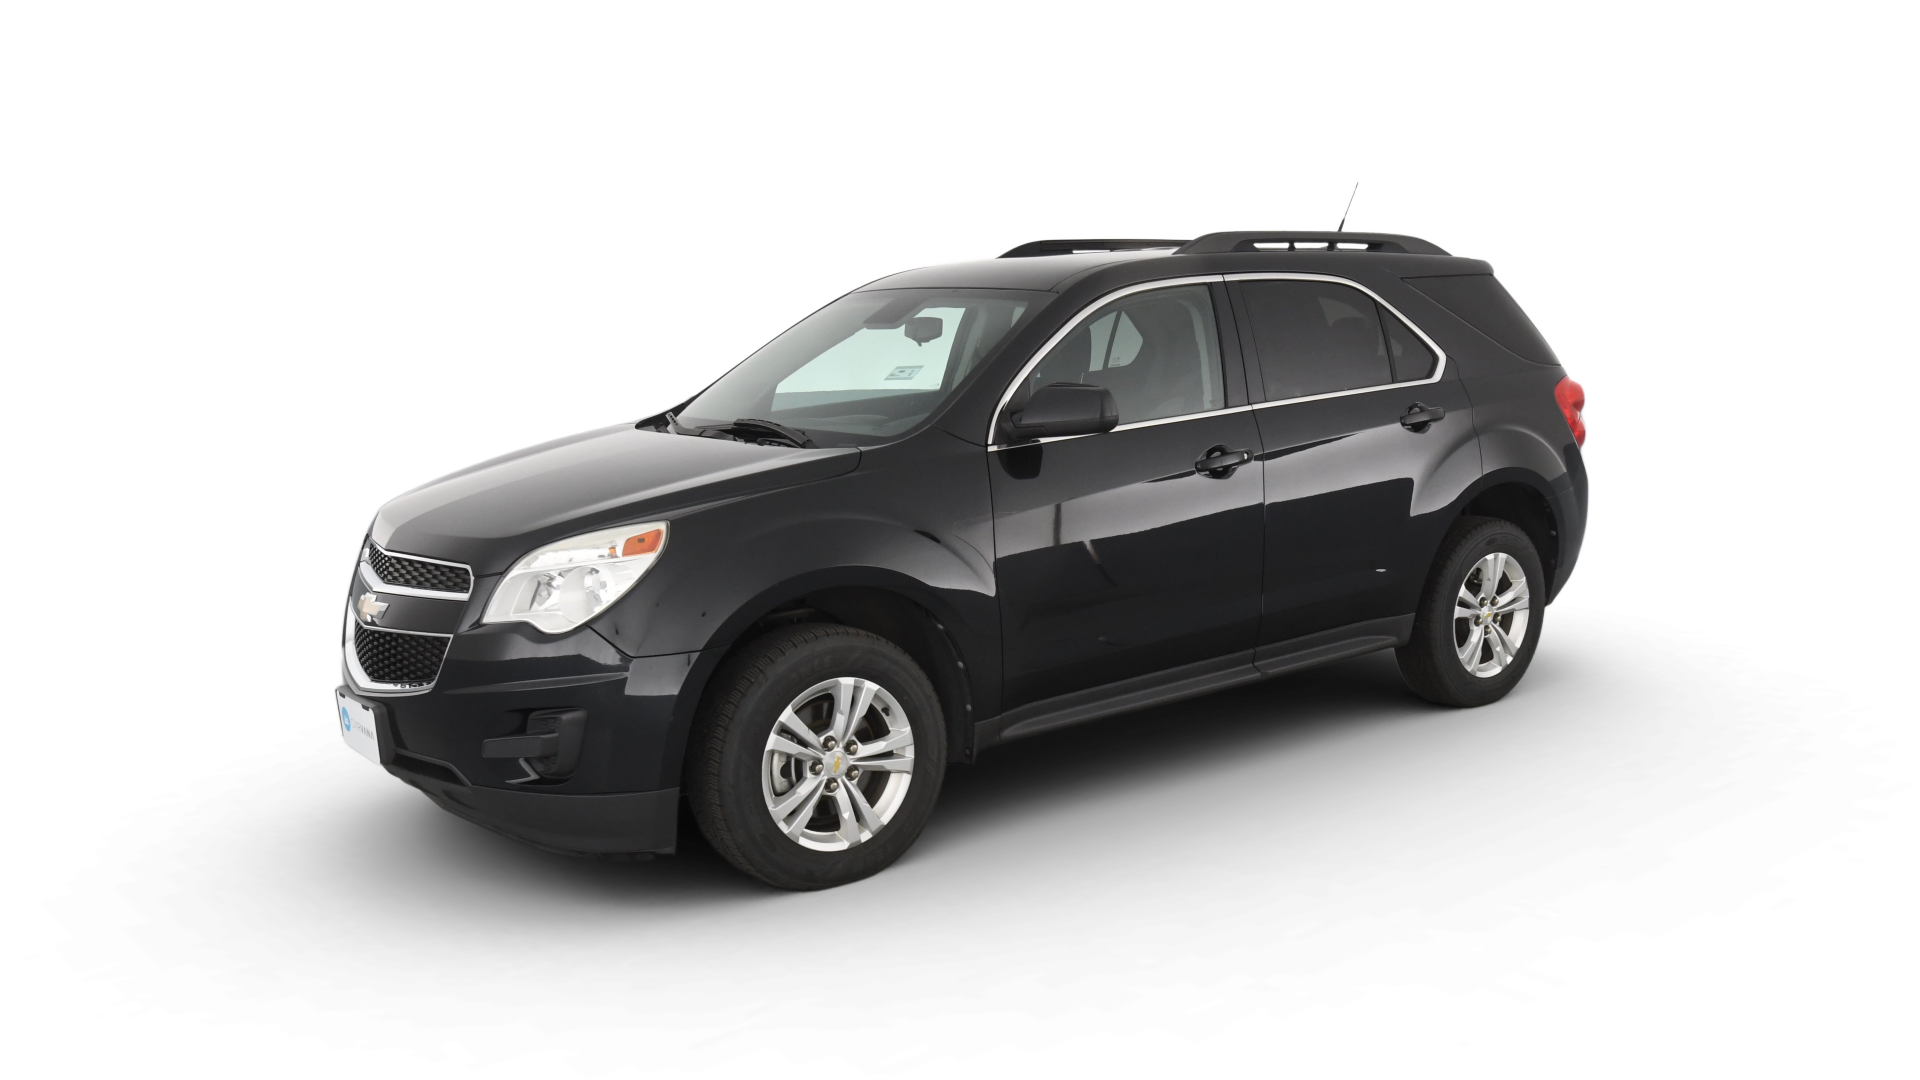 Used 2012 Chevrolet Equinox For Sale Online | Carvana